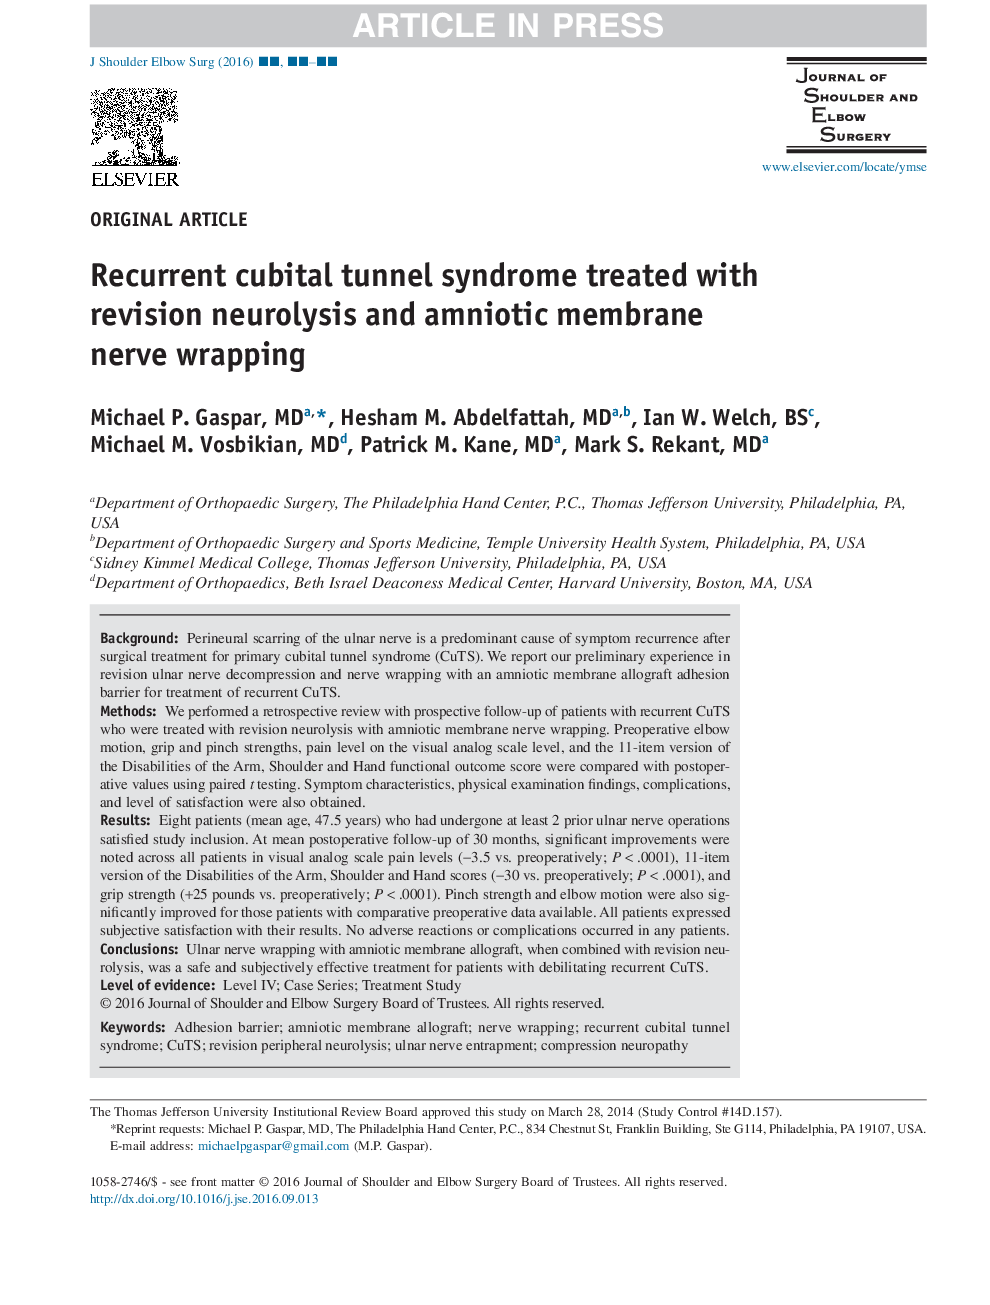 Recurrent cubital tunnel syndrome treated with revision neurolysis and amniotic membrane nerve wrapping